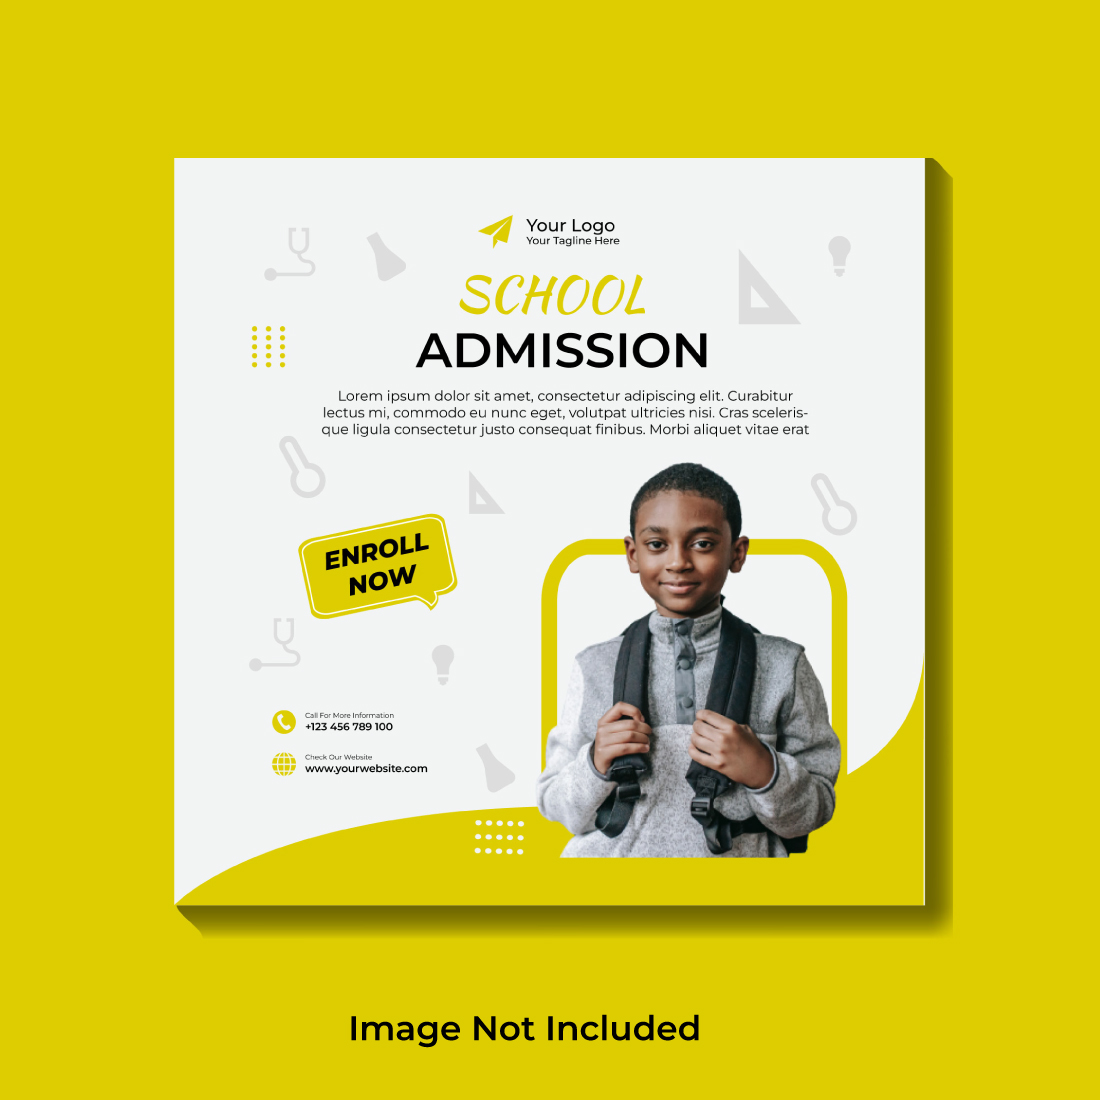 Stylish Admission Social Media Post Template Design cover image.